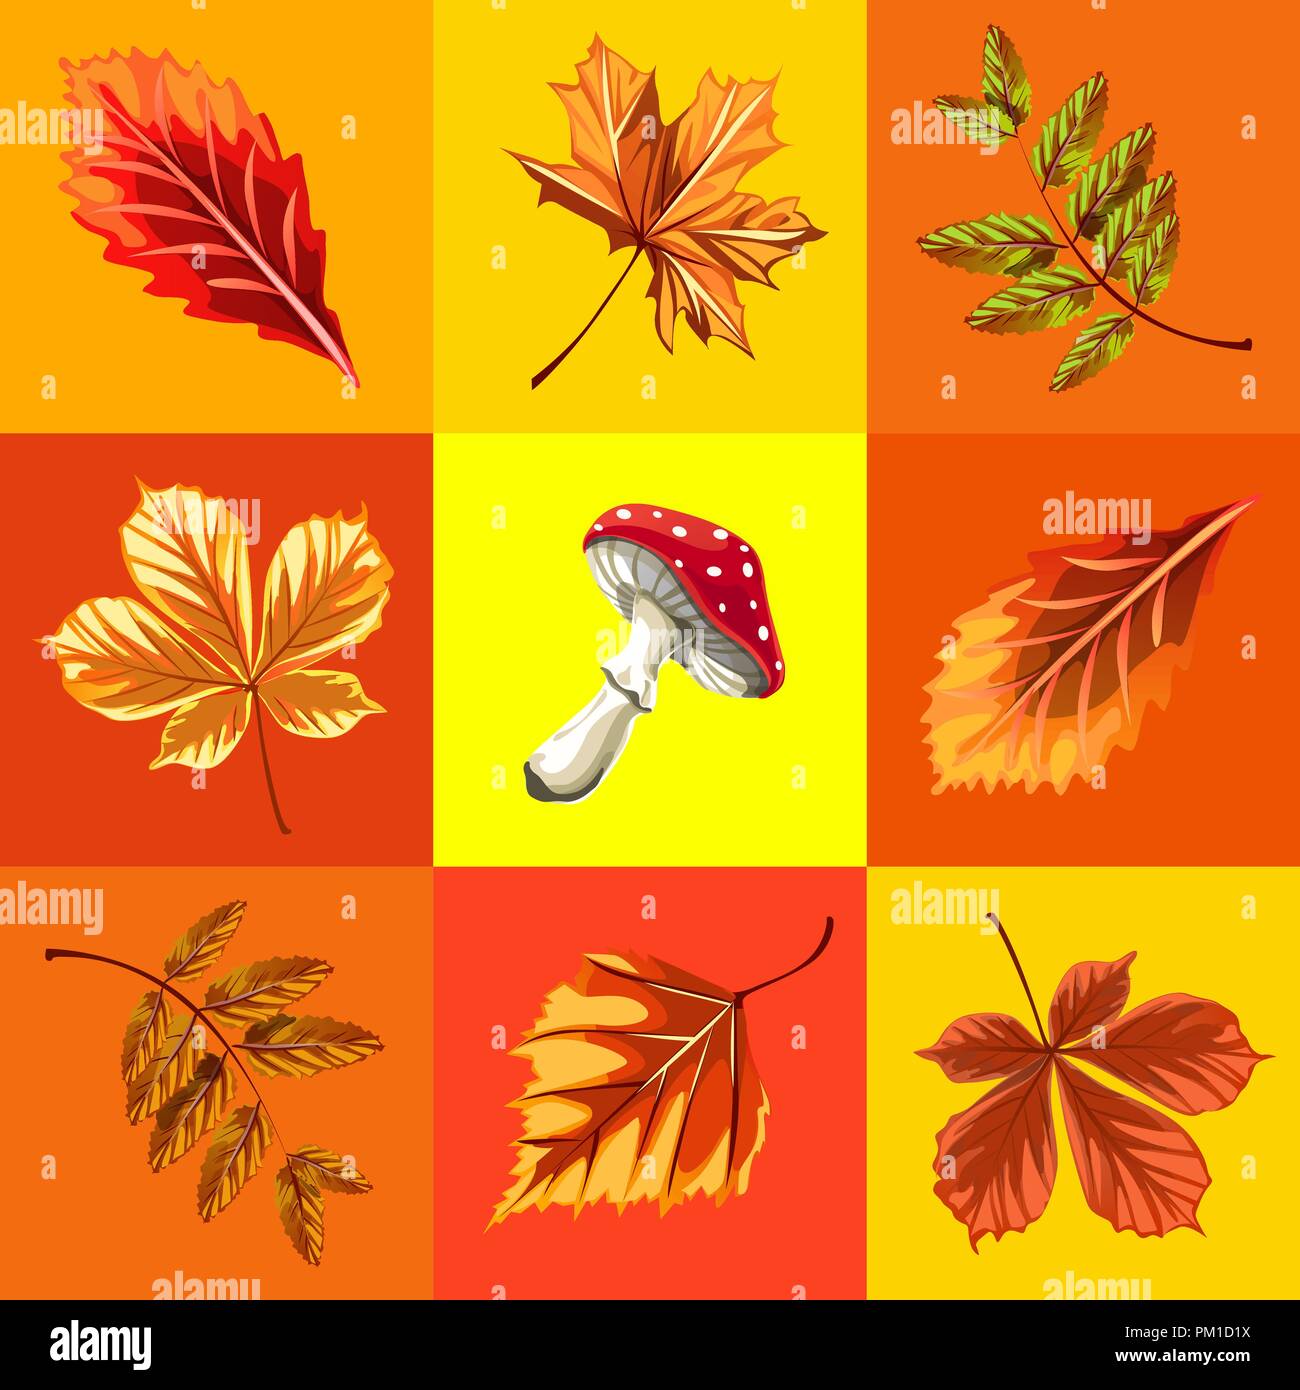 Cute poster or greeting card with modern design on theme of golden autumn. Ornate set of fallen autumn tree leaves of maple, rowan, birch, chestnut and mushroom fly agaric. Vector cartoon close-up. Stock Vector